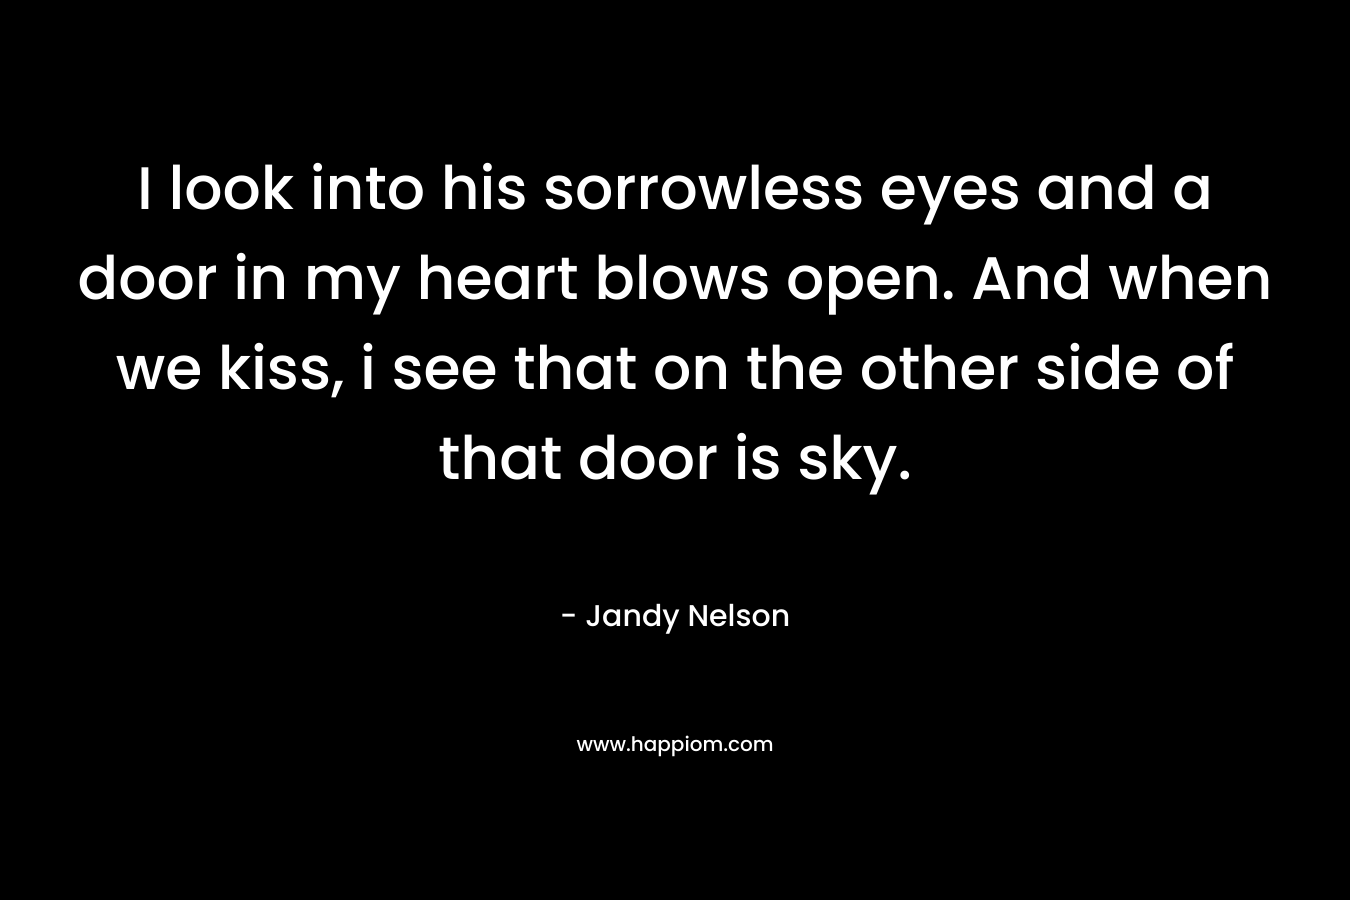 I look into his sorrowless eyes and a door in my heart blows open. And when we kiss, i see that on the other side of that door is sky.